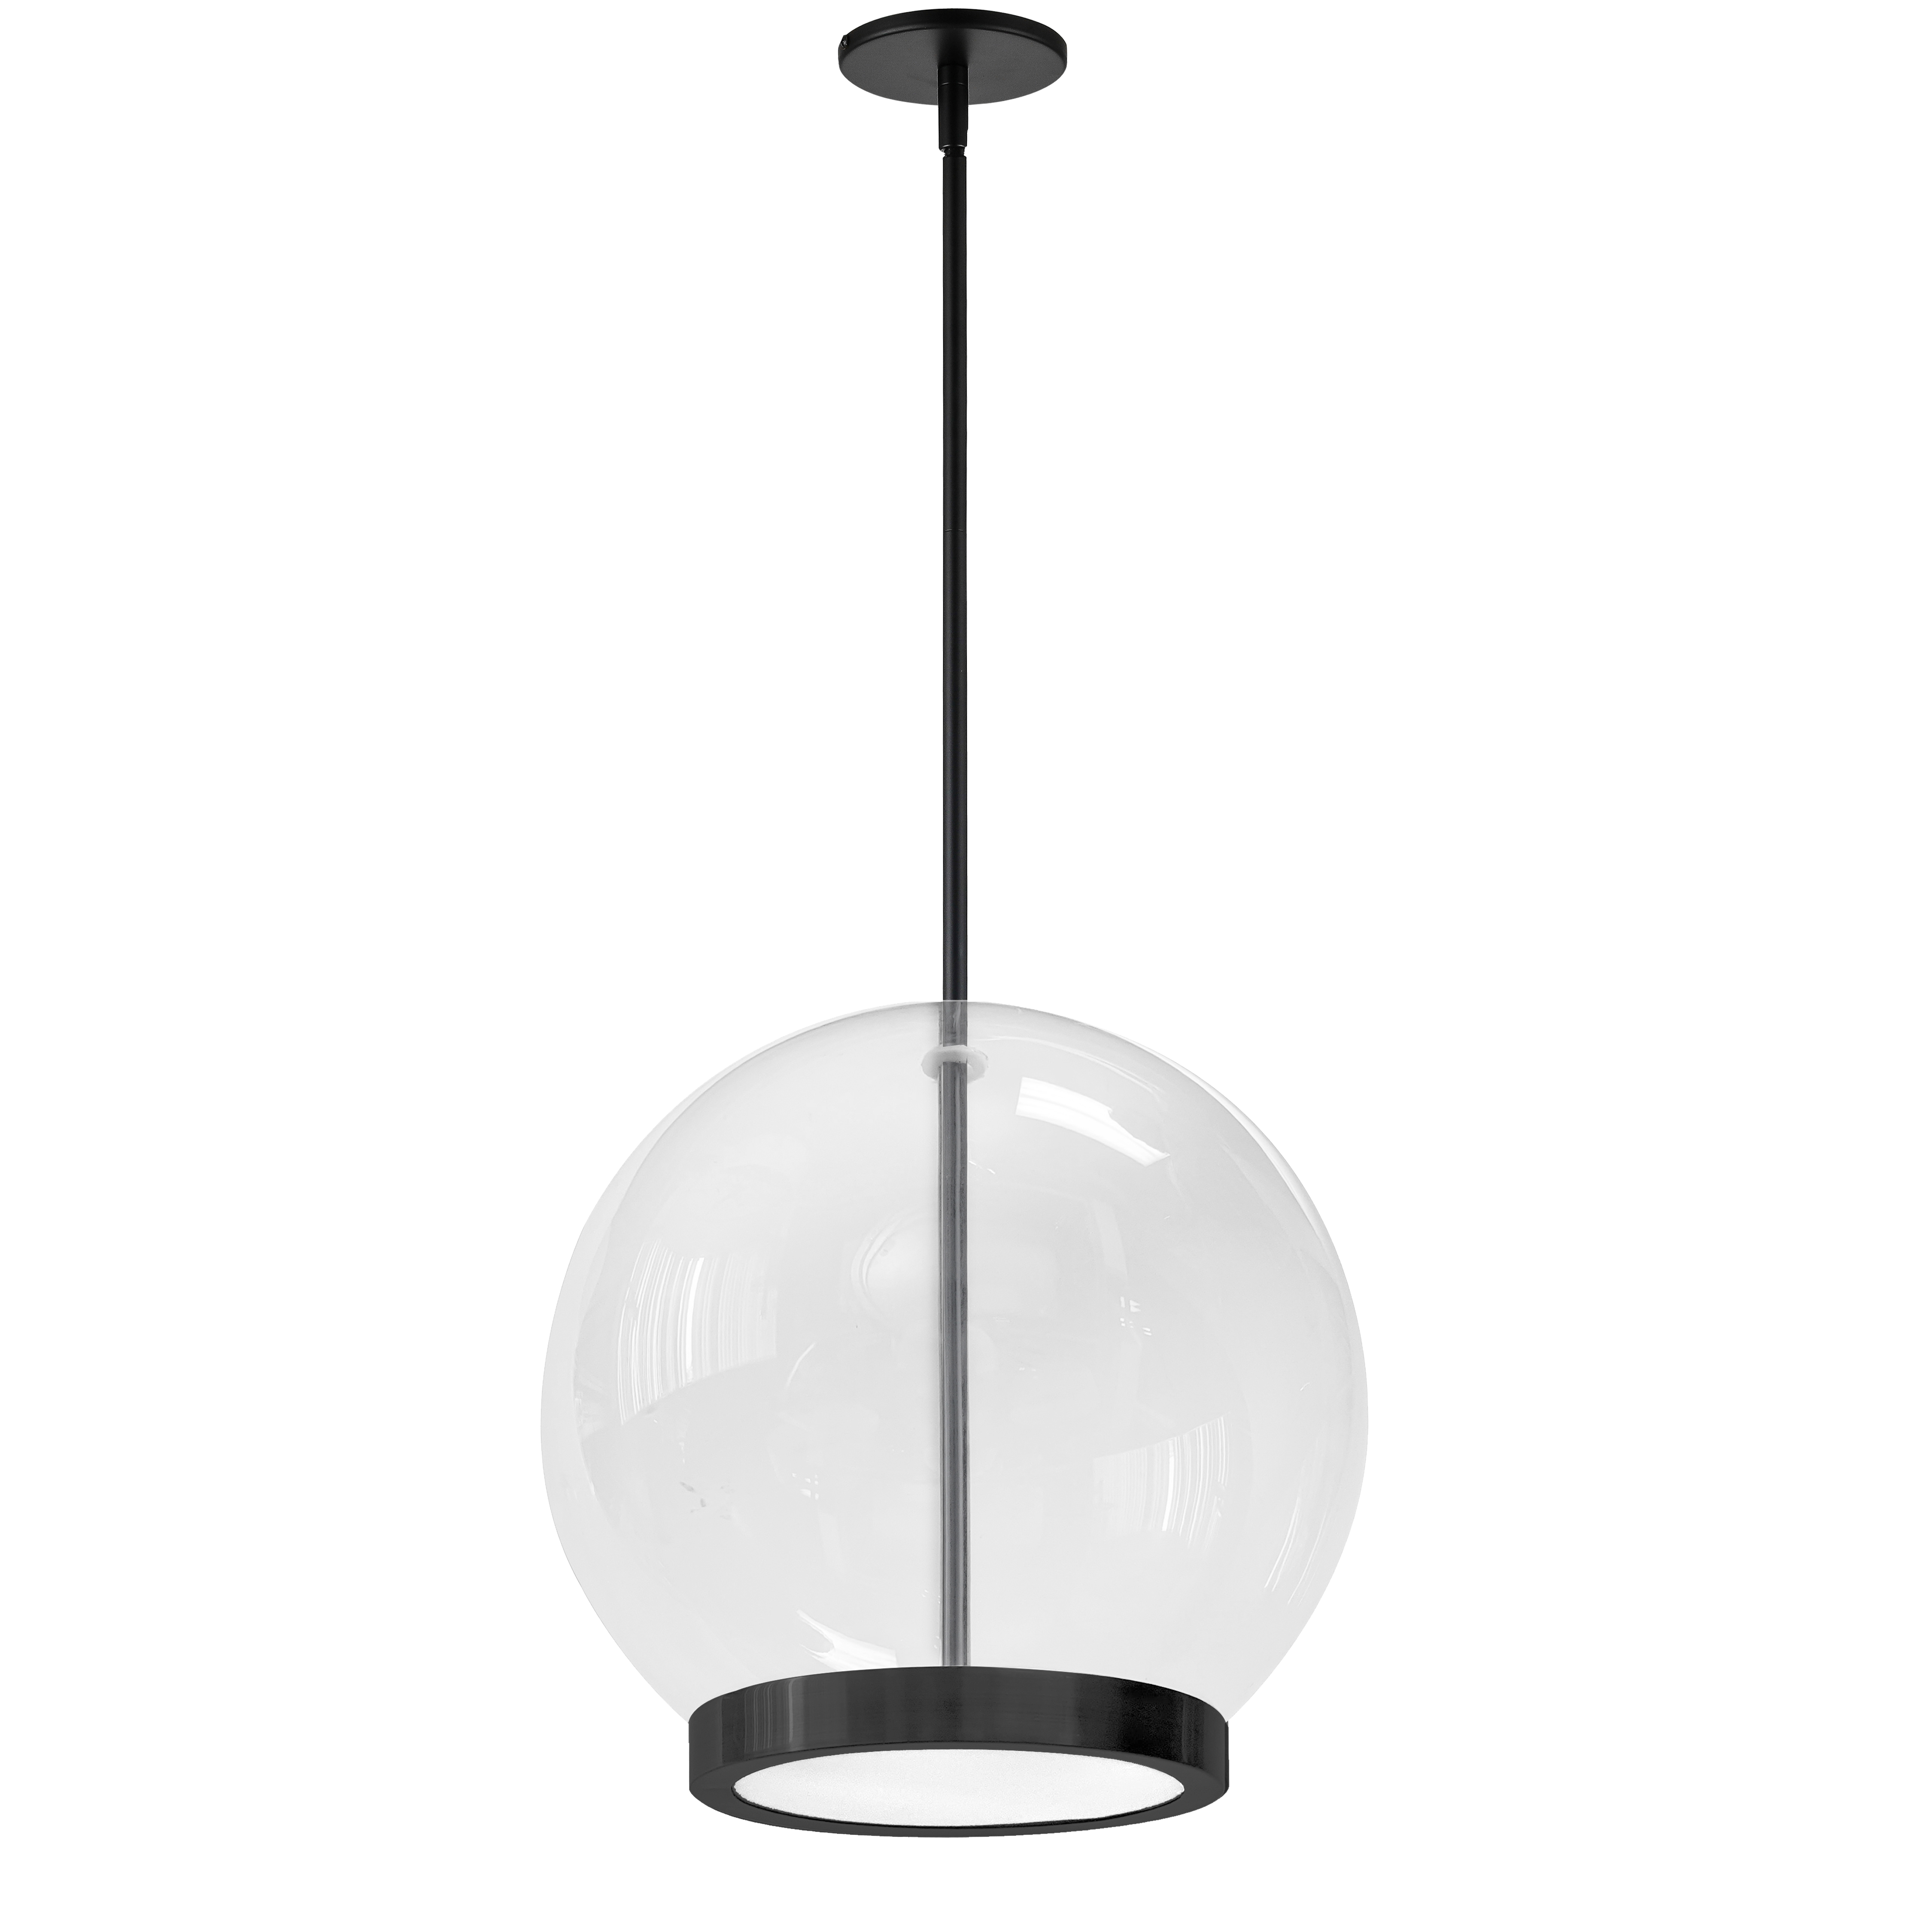 The Picotas family of lighting draws the eye upwards, and towards the furnishings around it, with its unique style. The design focuses on a large glass globe at its center. The metal frame in your choice of finish provides a contrast, holding the globe in a circular housing from below. It's a unique take on lighting that emphasizes the elegance of the sphere with a contemporary artistic edge.